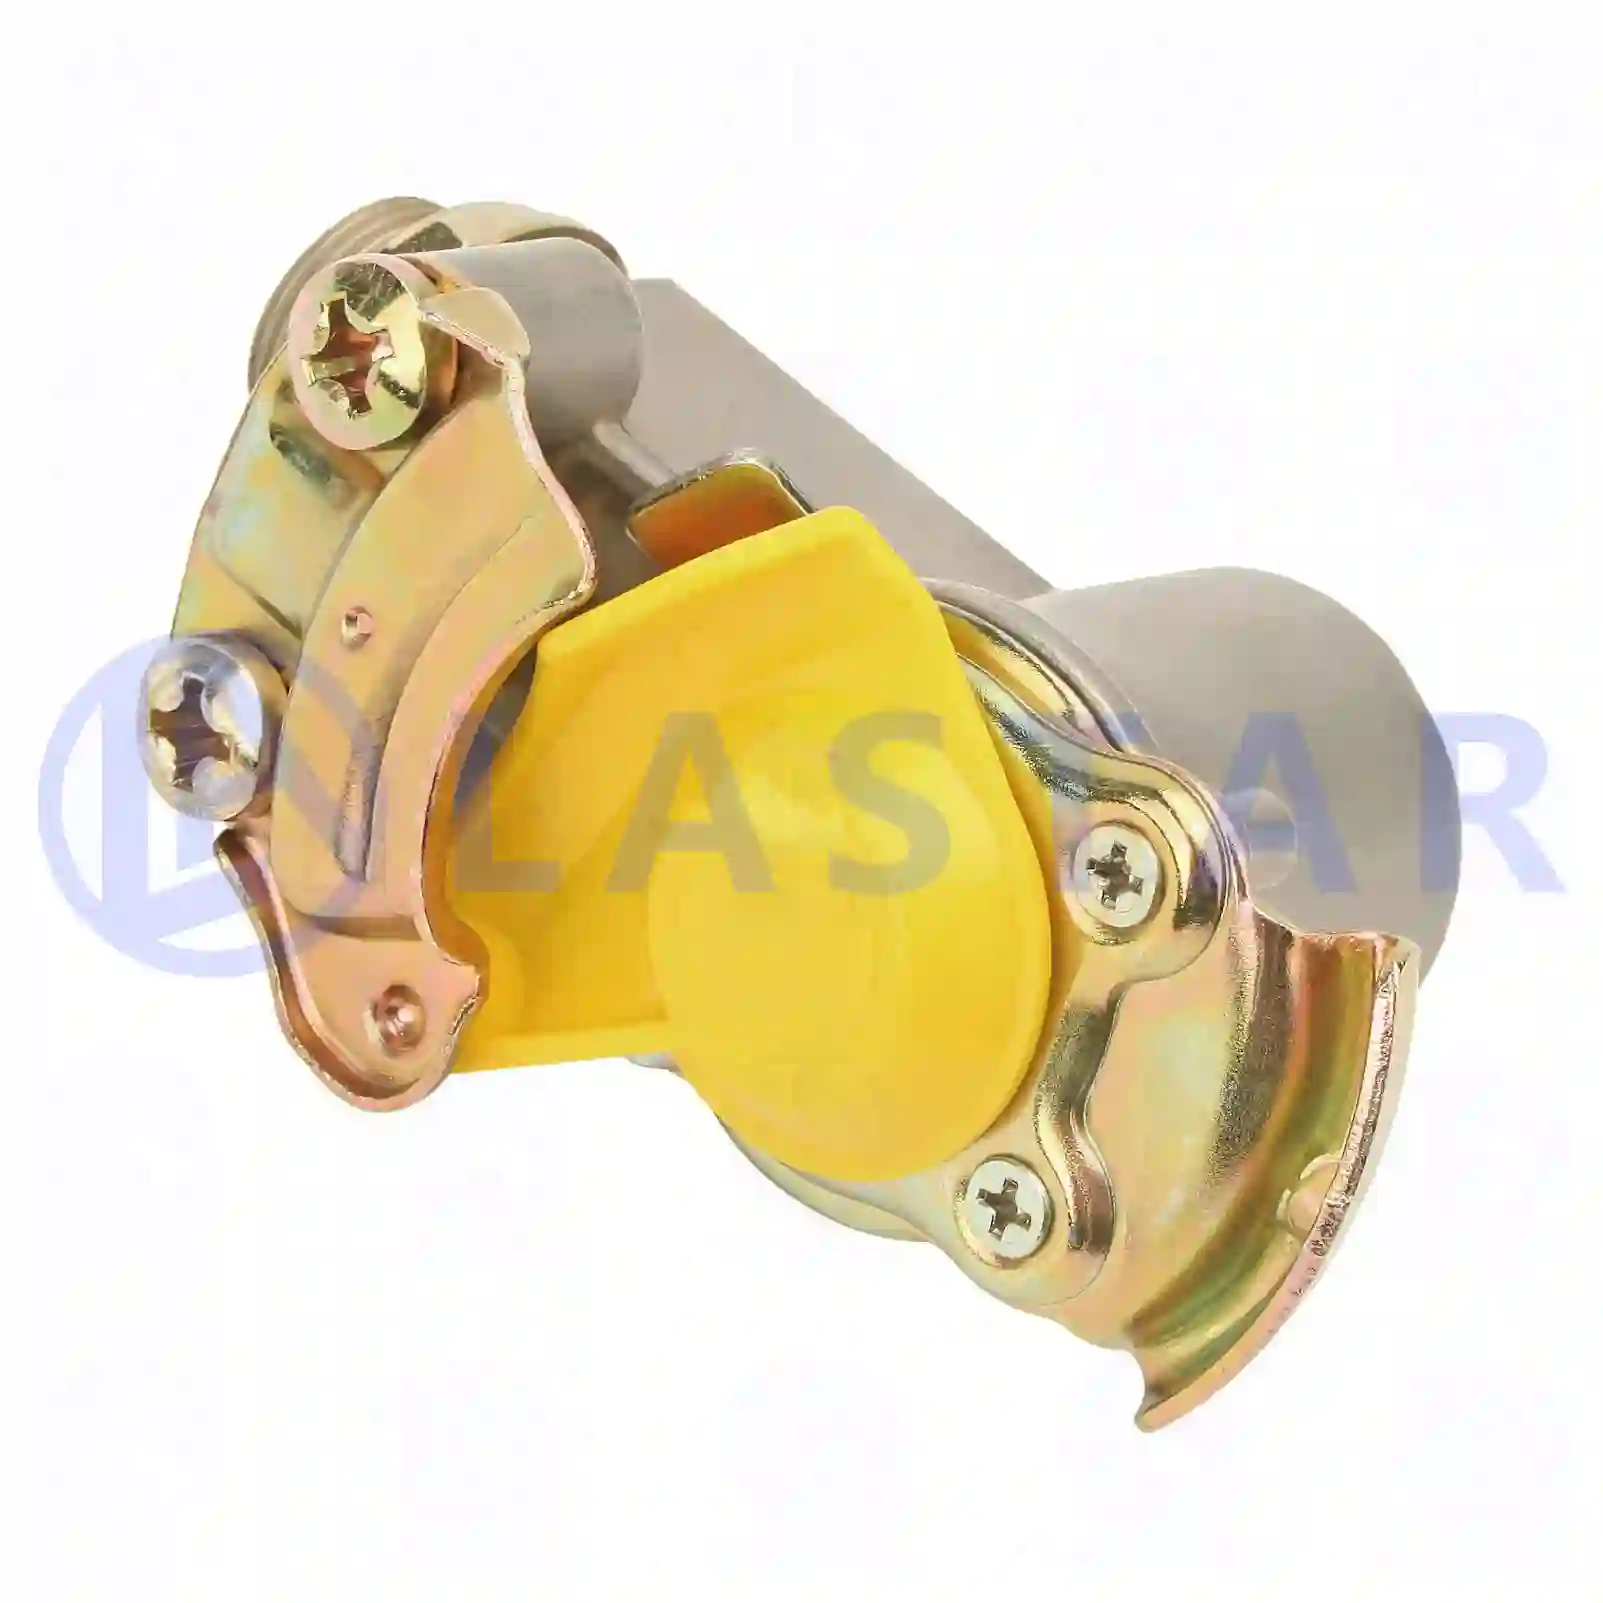 Compressed Air Palm coupling, yellow lid, with pipe filter, la no: 77725448 ,  oem no:1518206, 21151103103, 6500331, 5058203290, 5820329, 81998062077, AIF1174, 1912348, 1020771, 55106, WA9522010010 Lastar Spare Part | Truck Spare Parts, Auotomotive Spare Parts